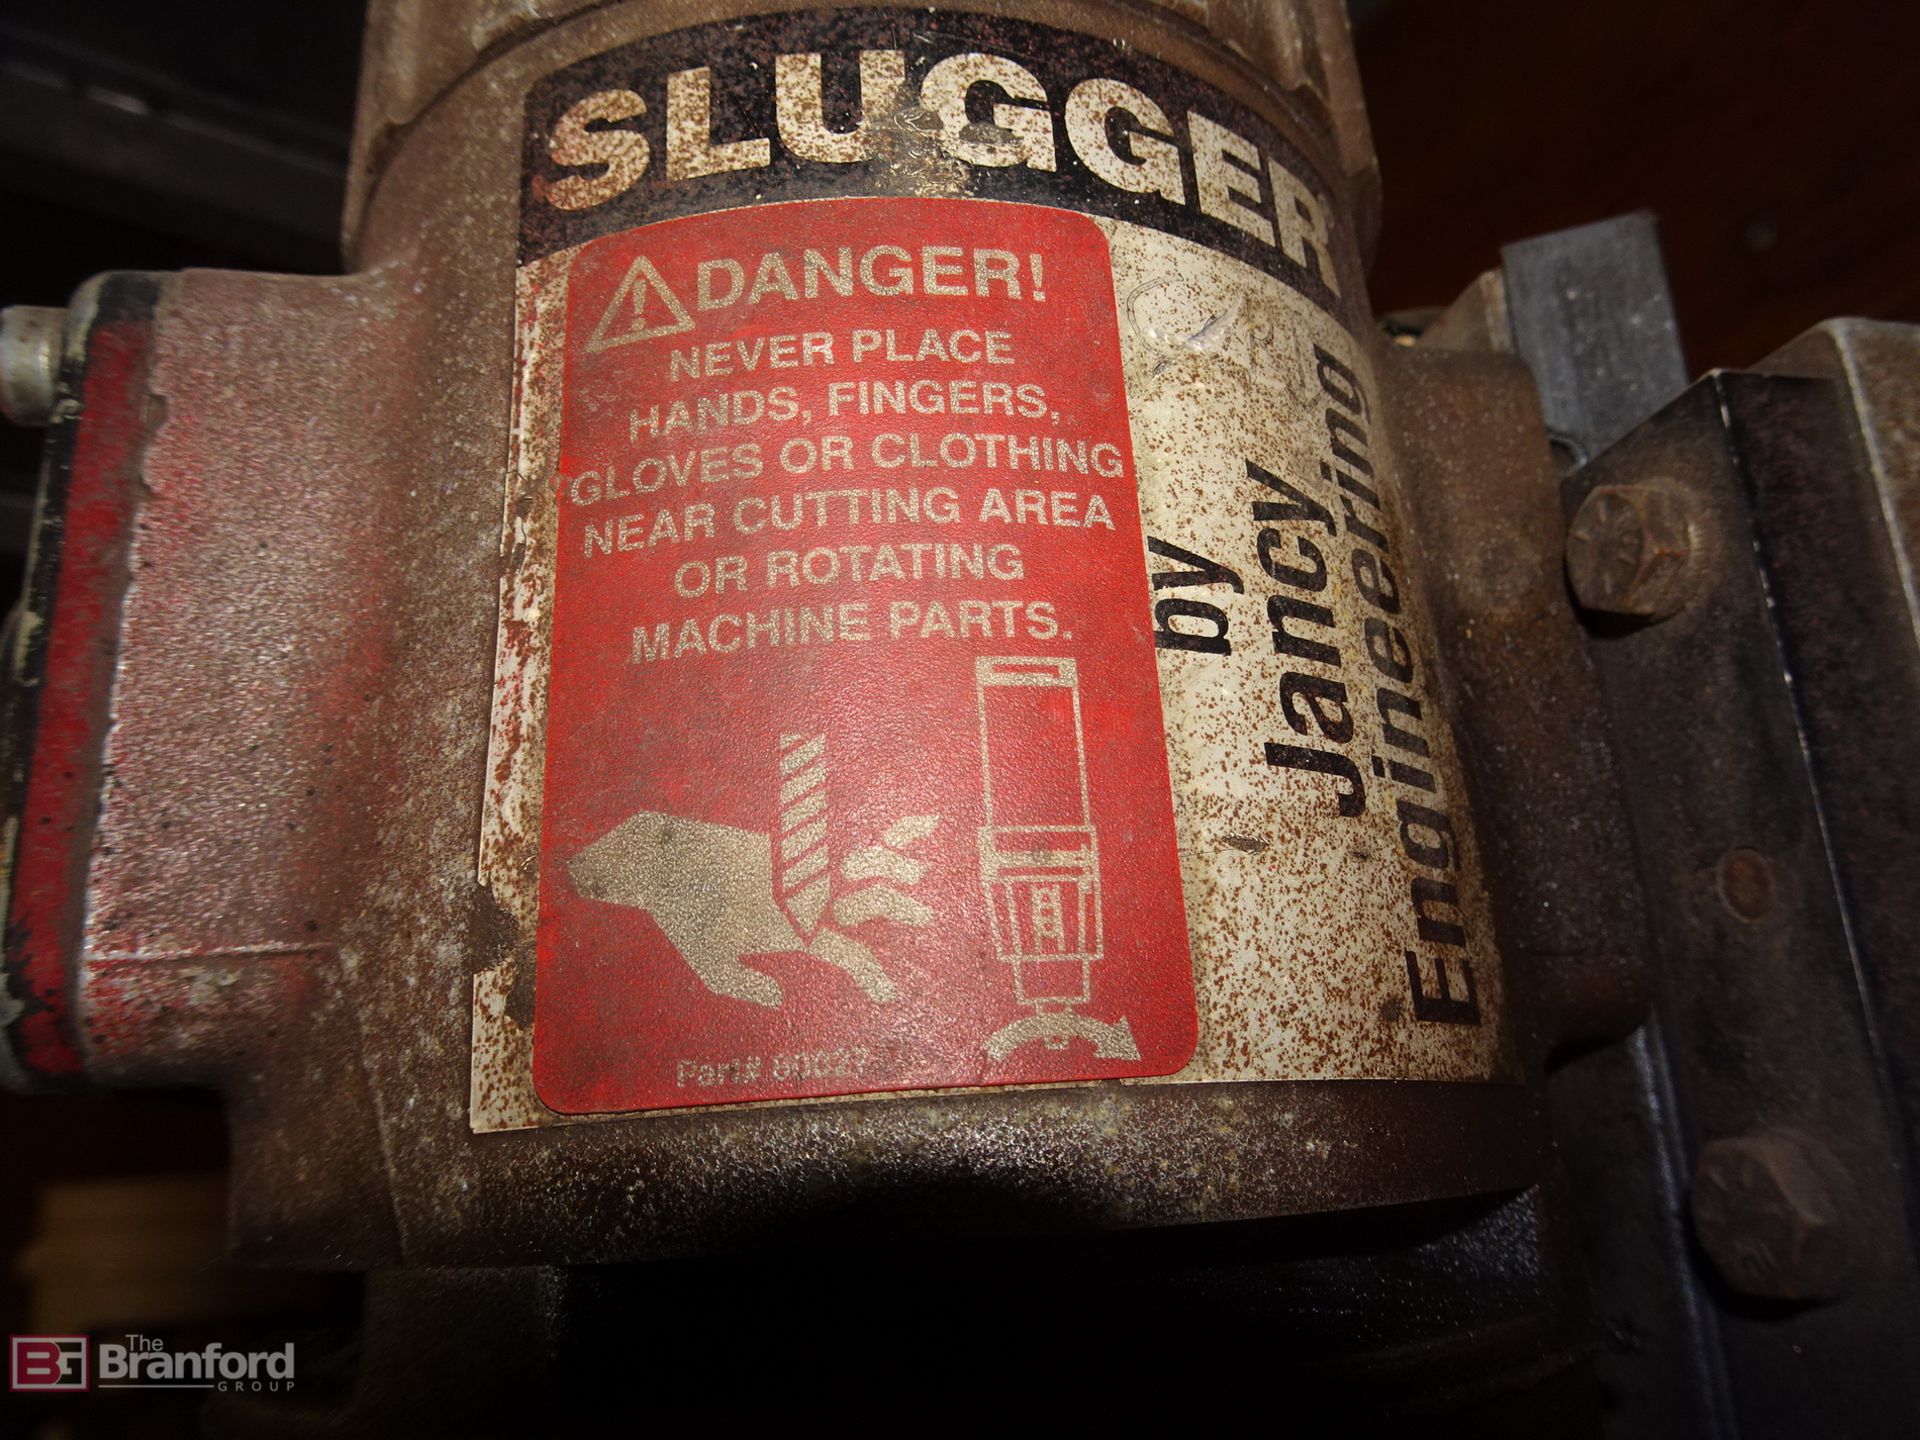 Slugger Heavy Duty Electromagnetic Drill Press - Image 4 of 4